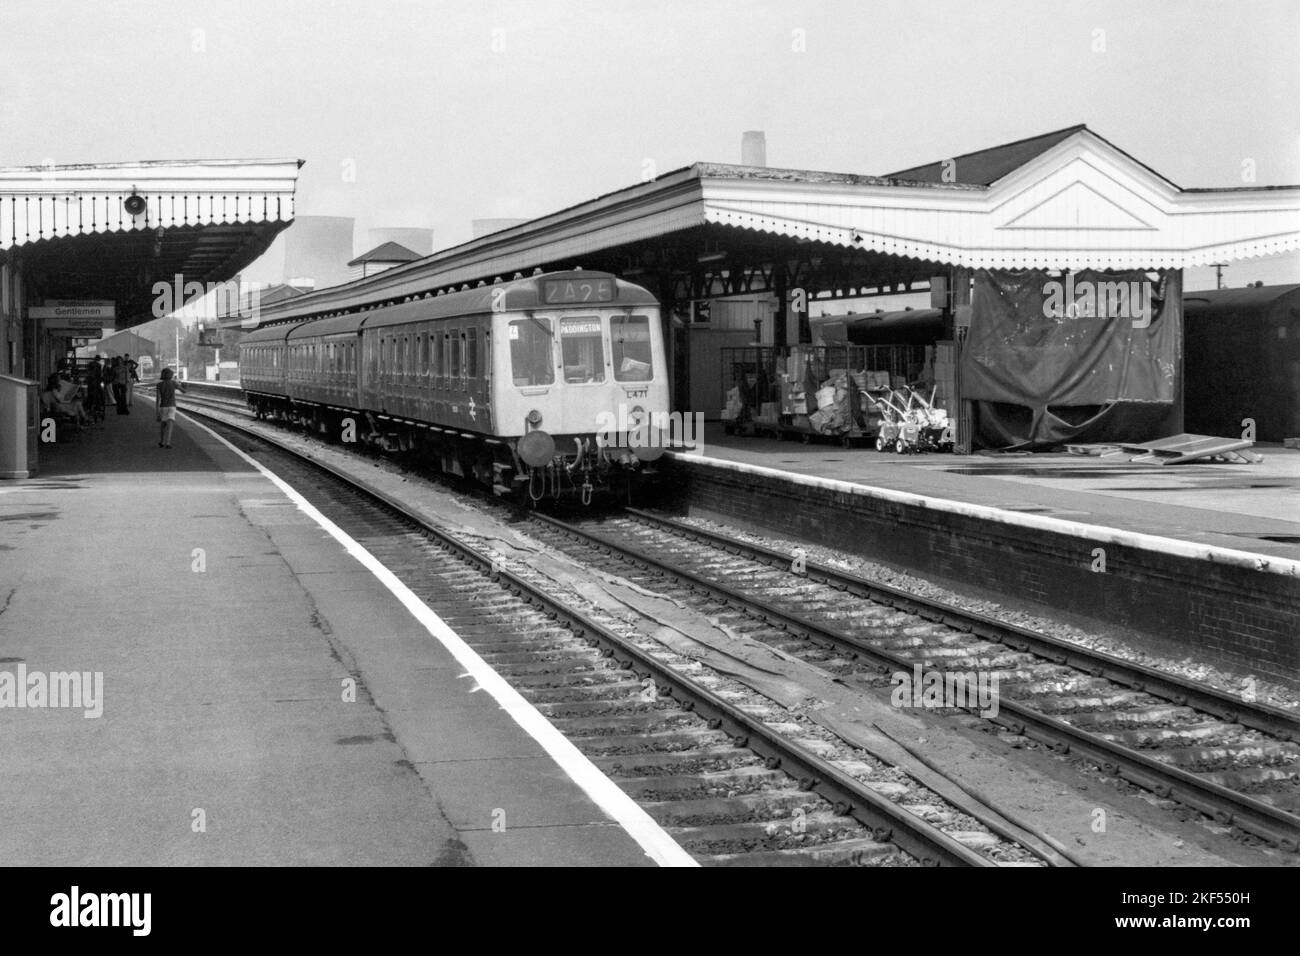 original british rail diesel multiple unit l471 on passenger service didcot late 1970s early 1980s Stock Photo